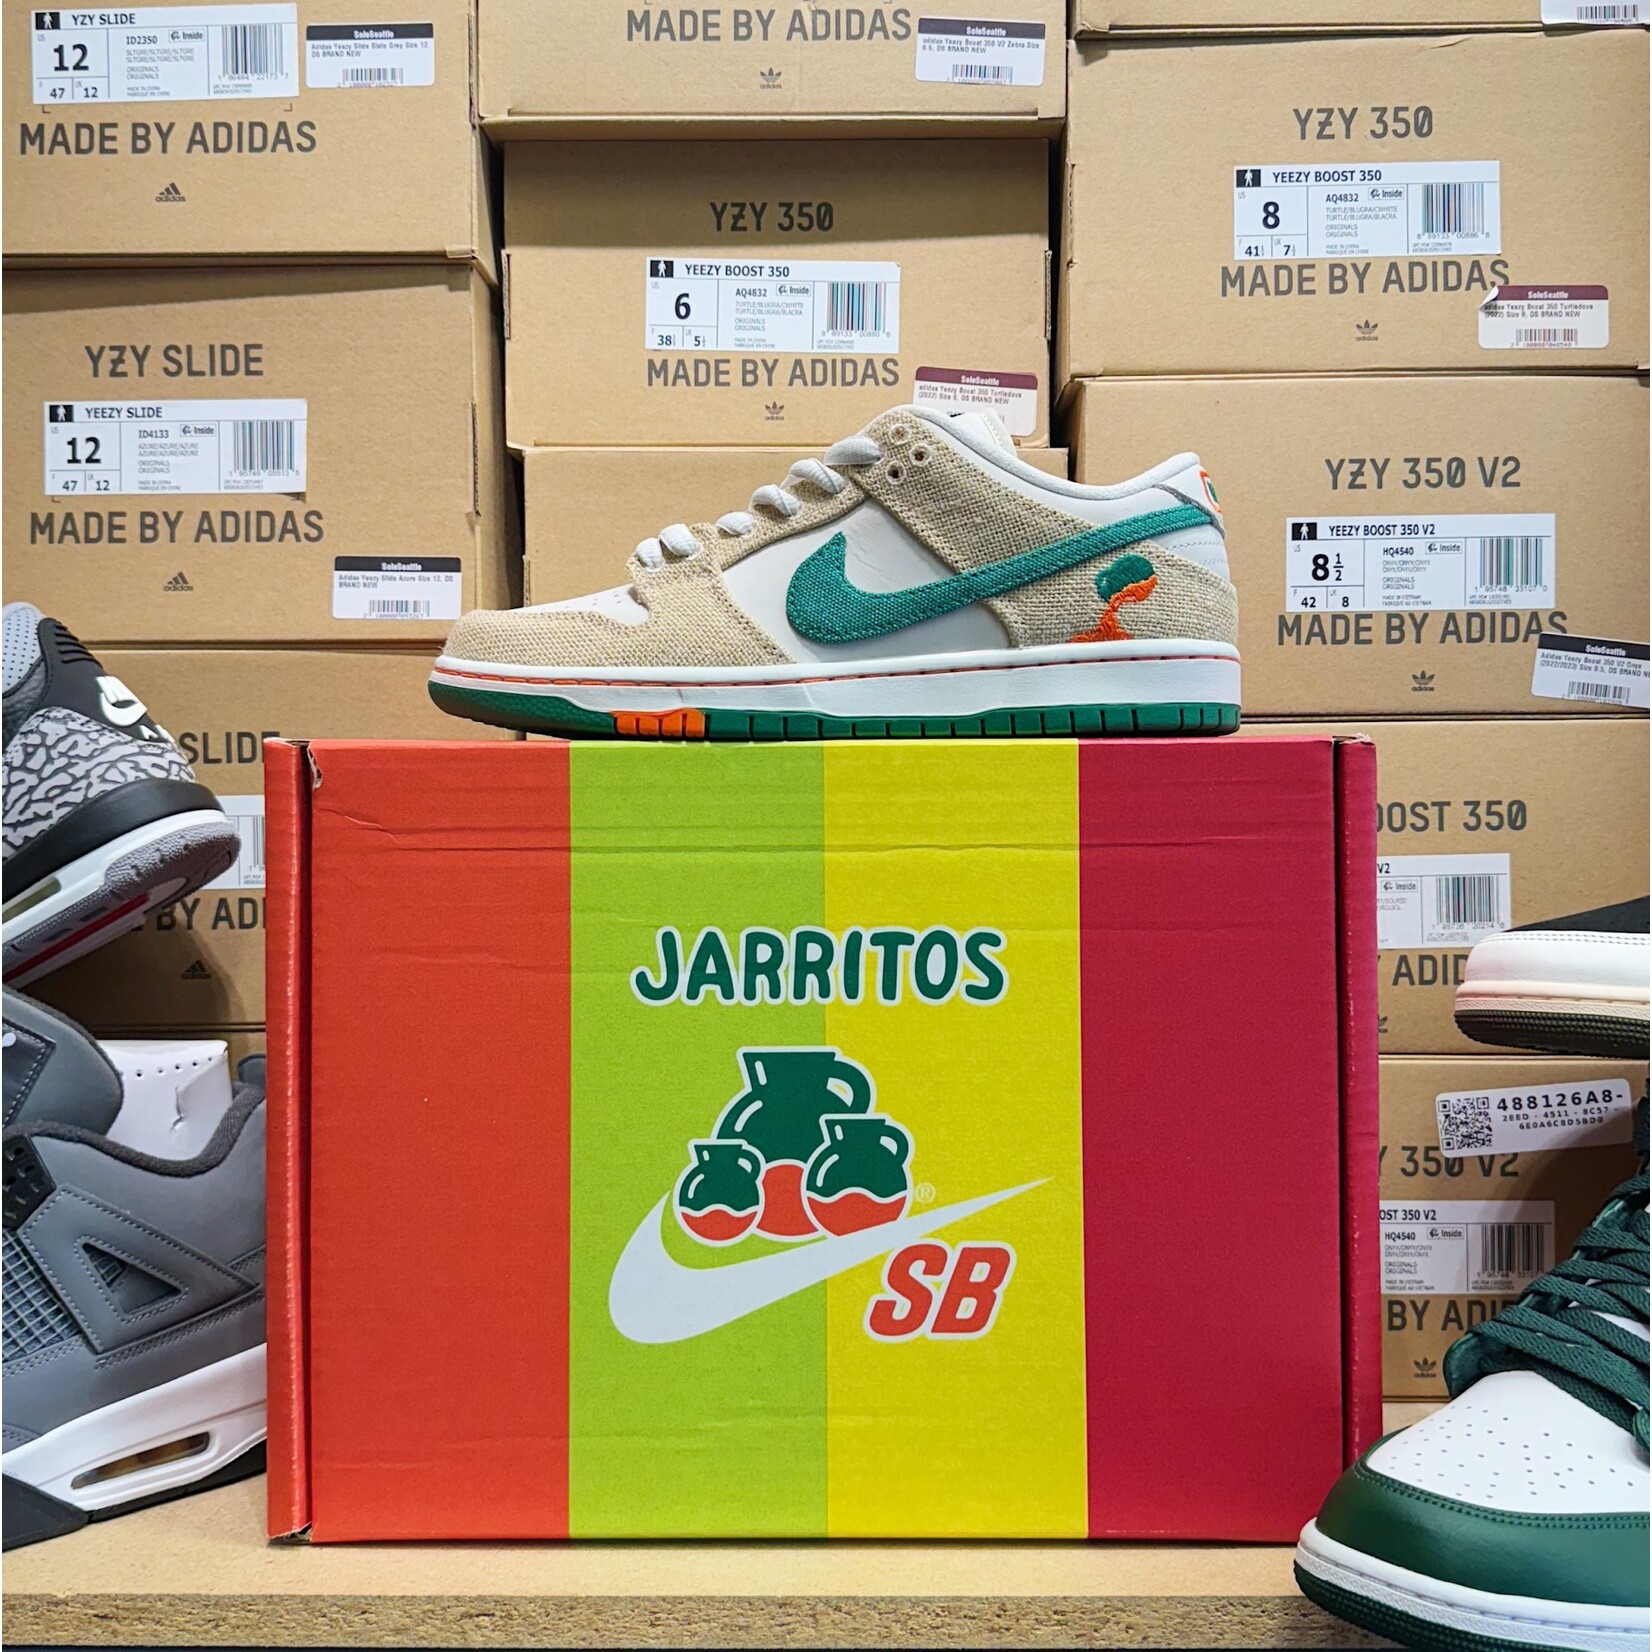 Nike Nike SB Dunk Low Jarritos (SPECIAL  BOX BOTTLES) Size 8.5, DS BRAND NEW